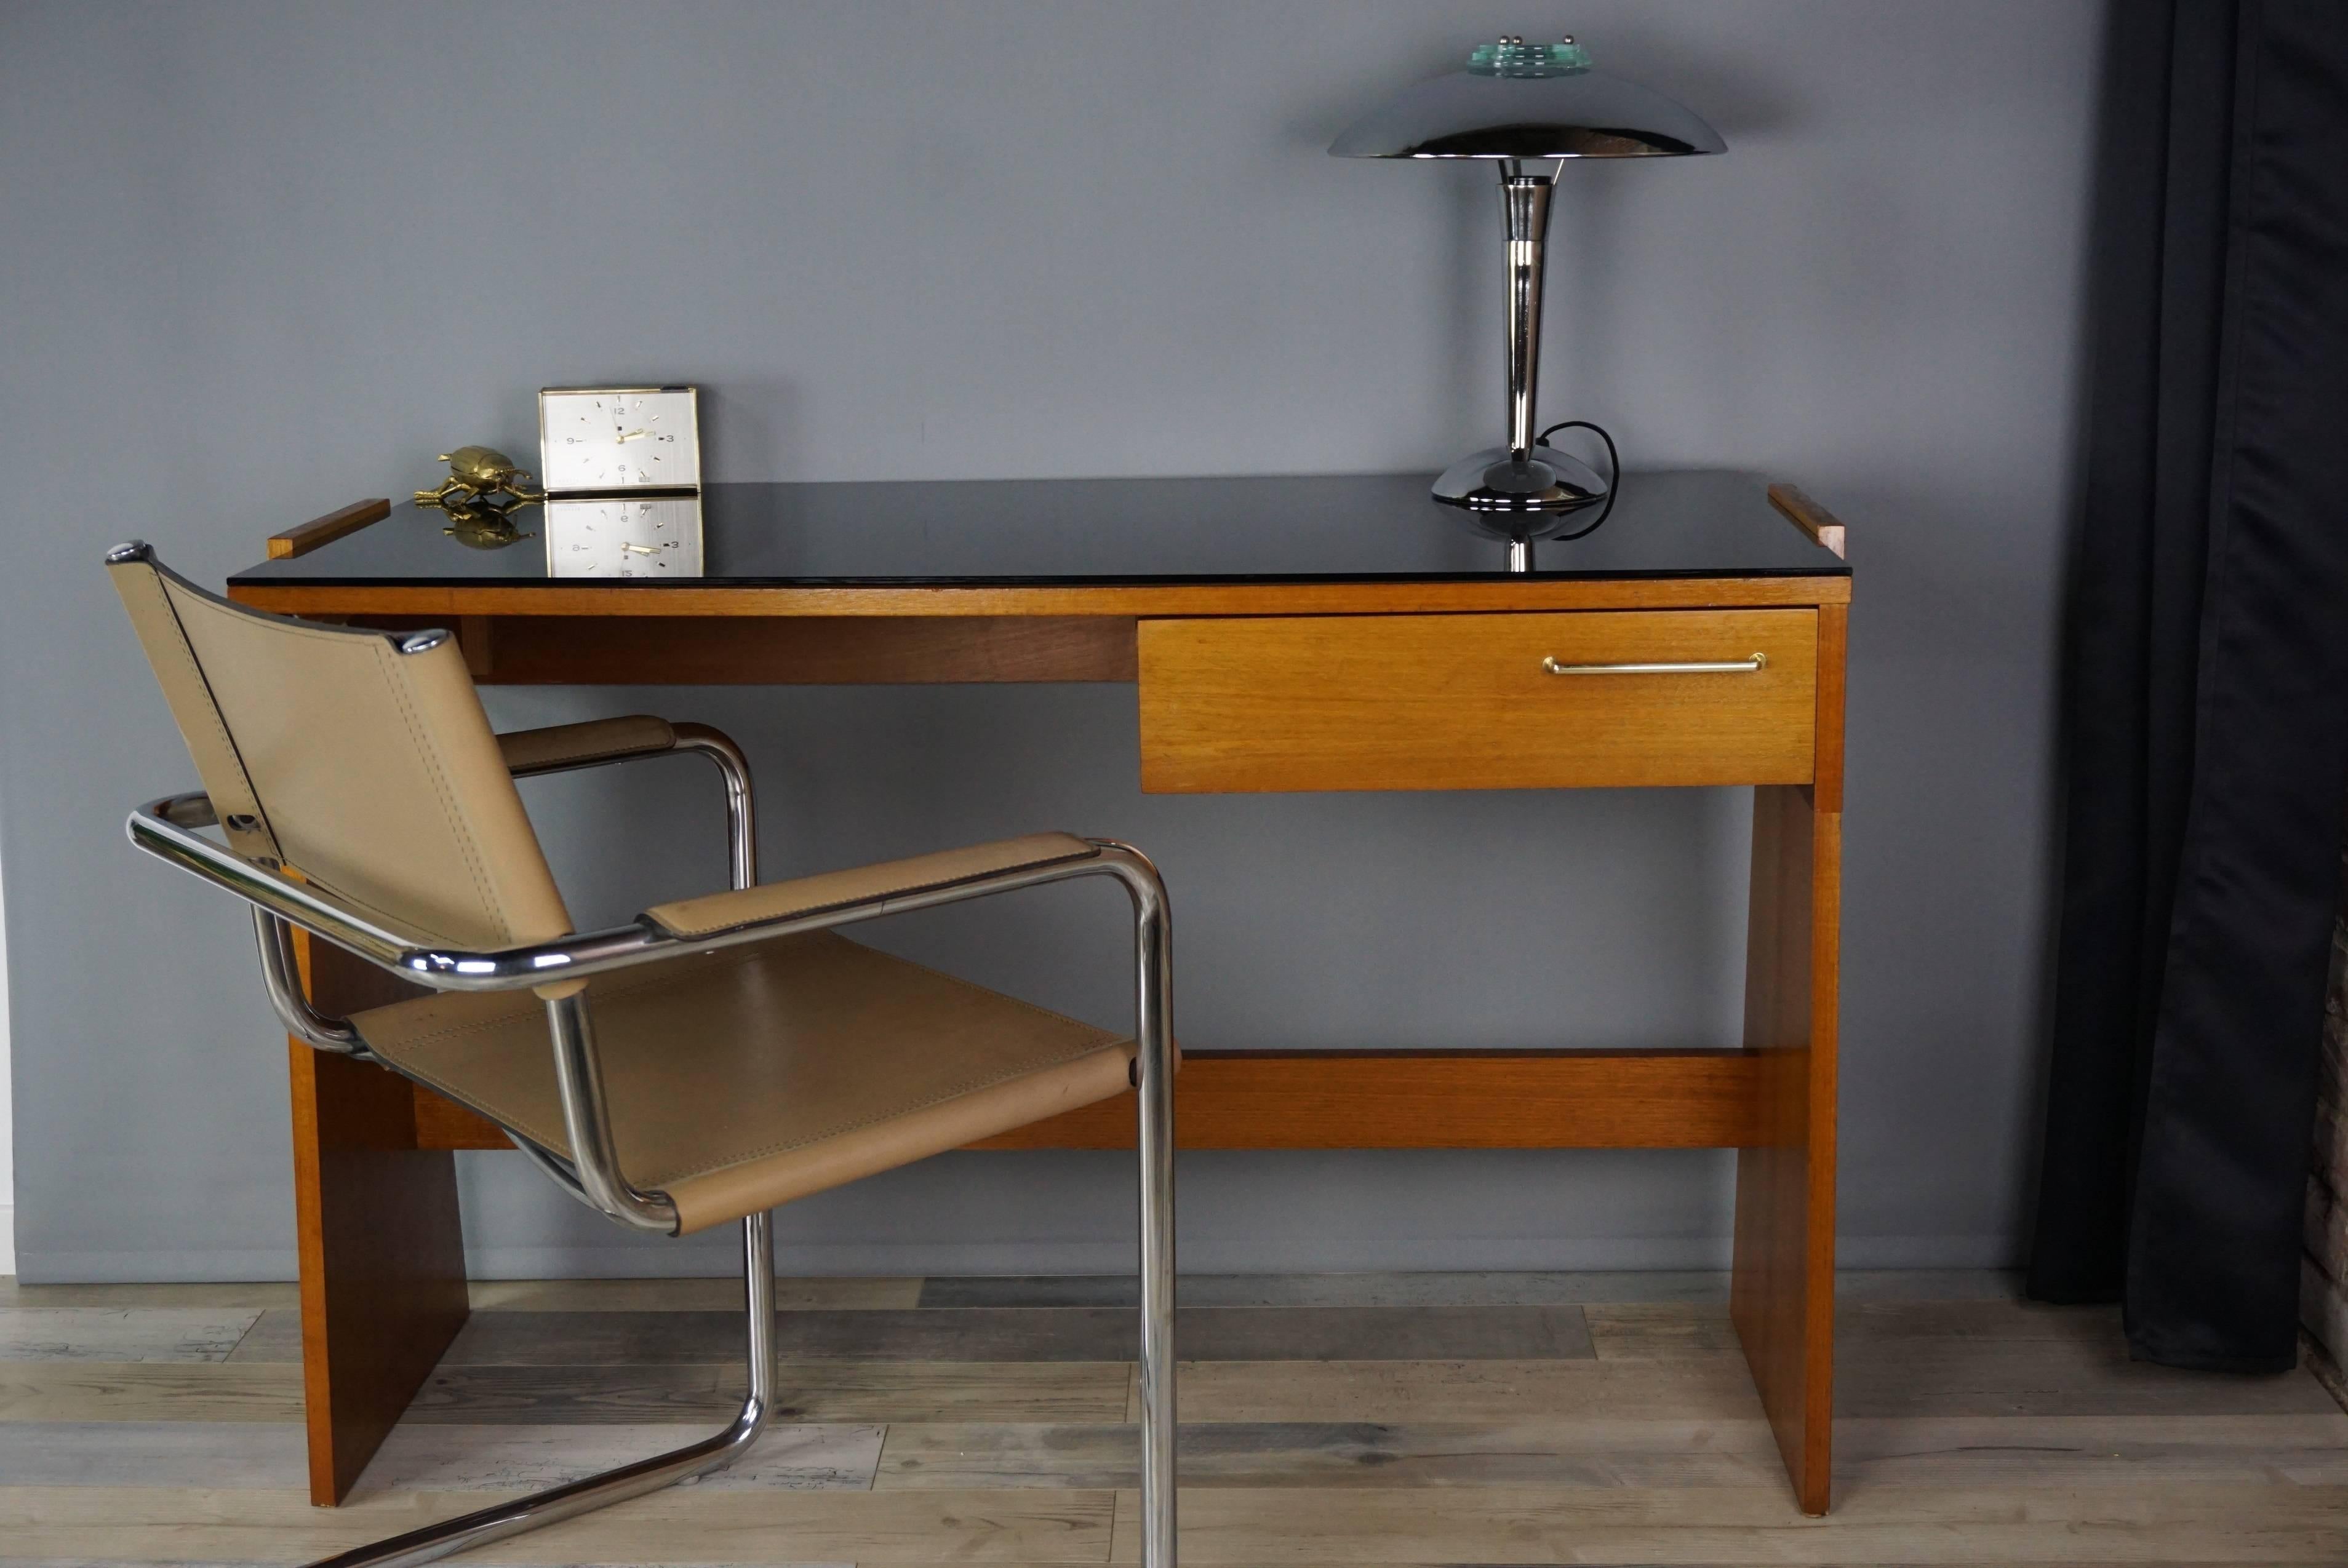 20th Century Teak and Black Glass Top Desk Design of the 1960s